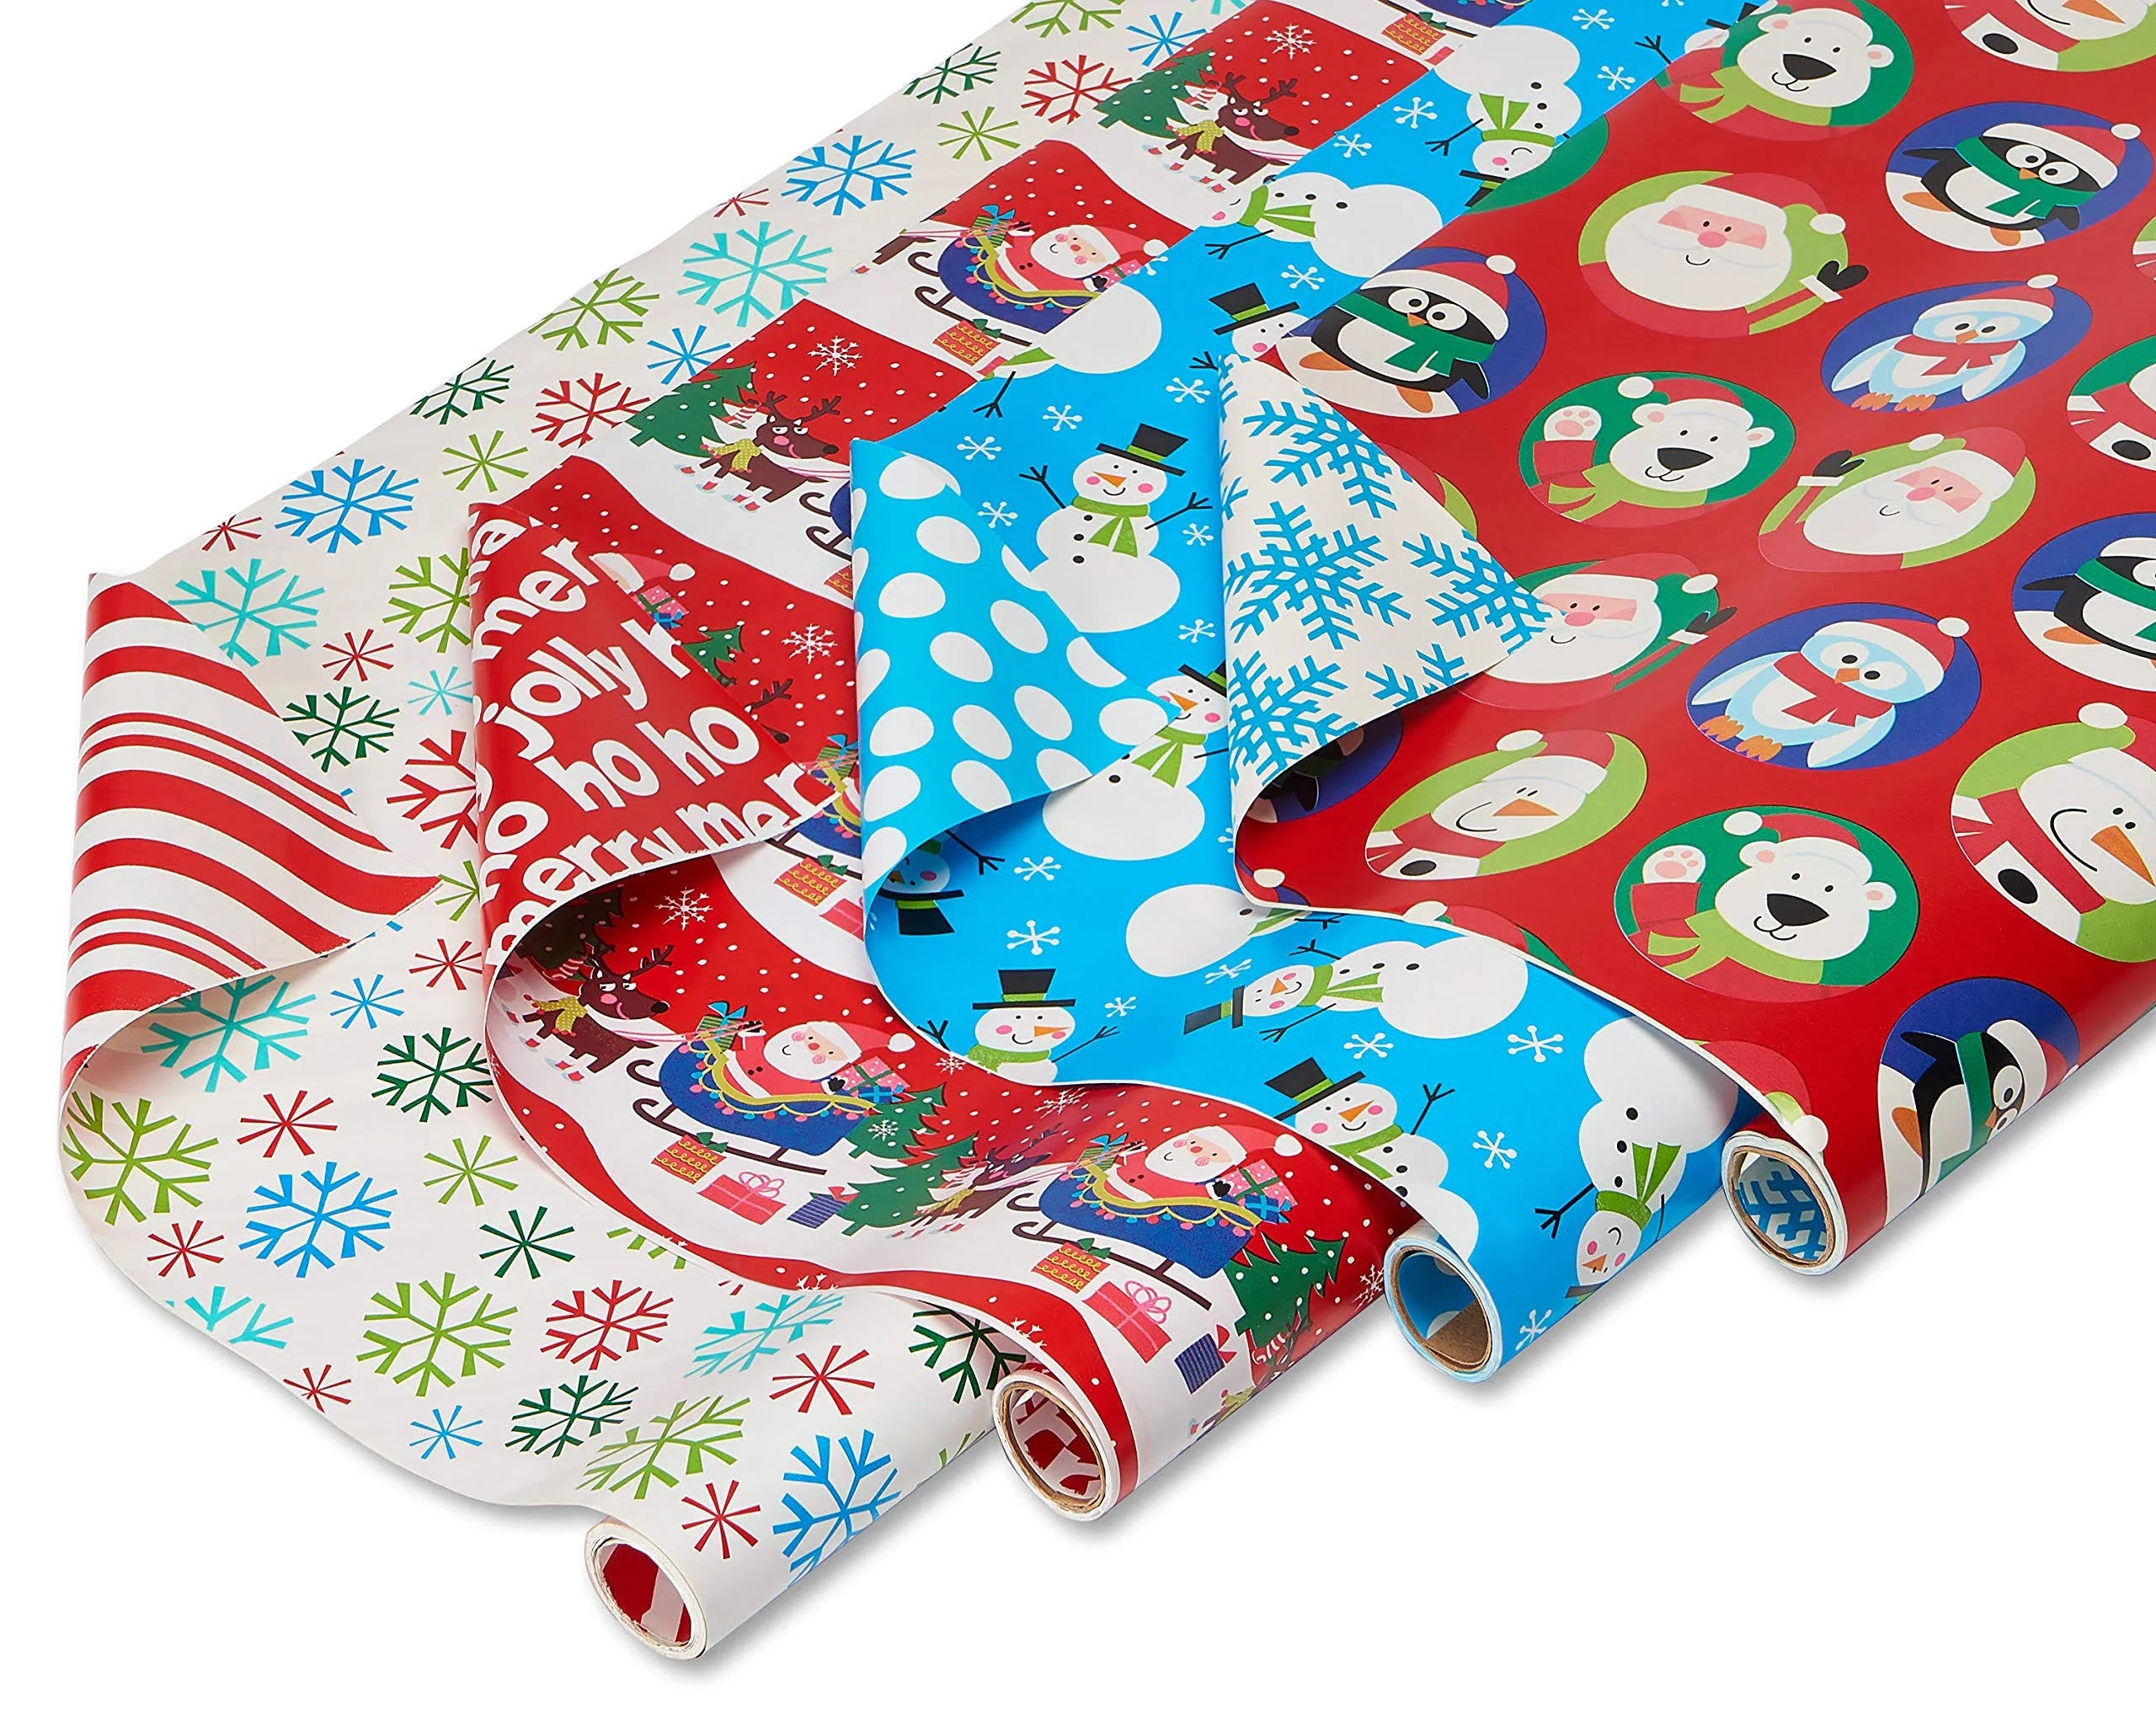 Cheerful Christmas Wrapping Paper Bundle | Image